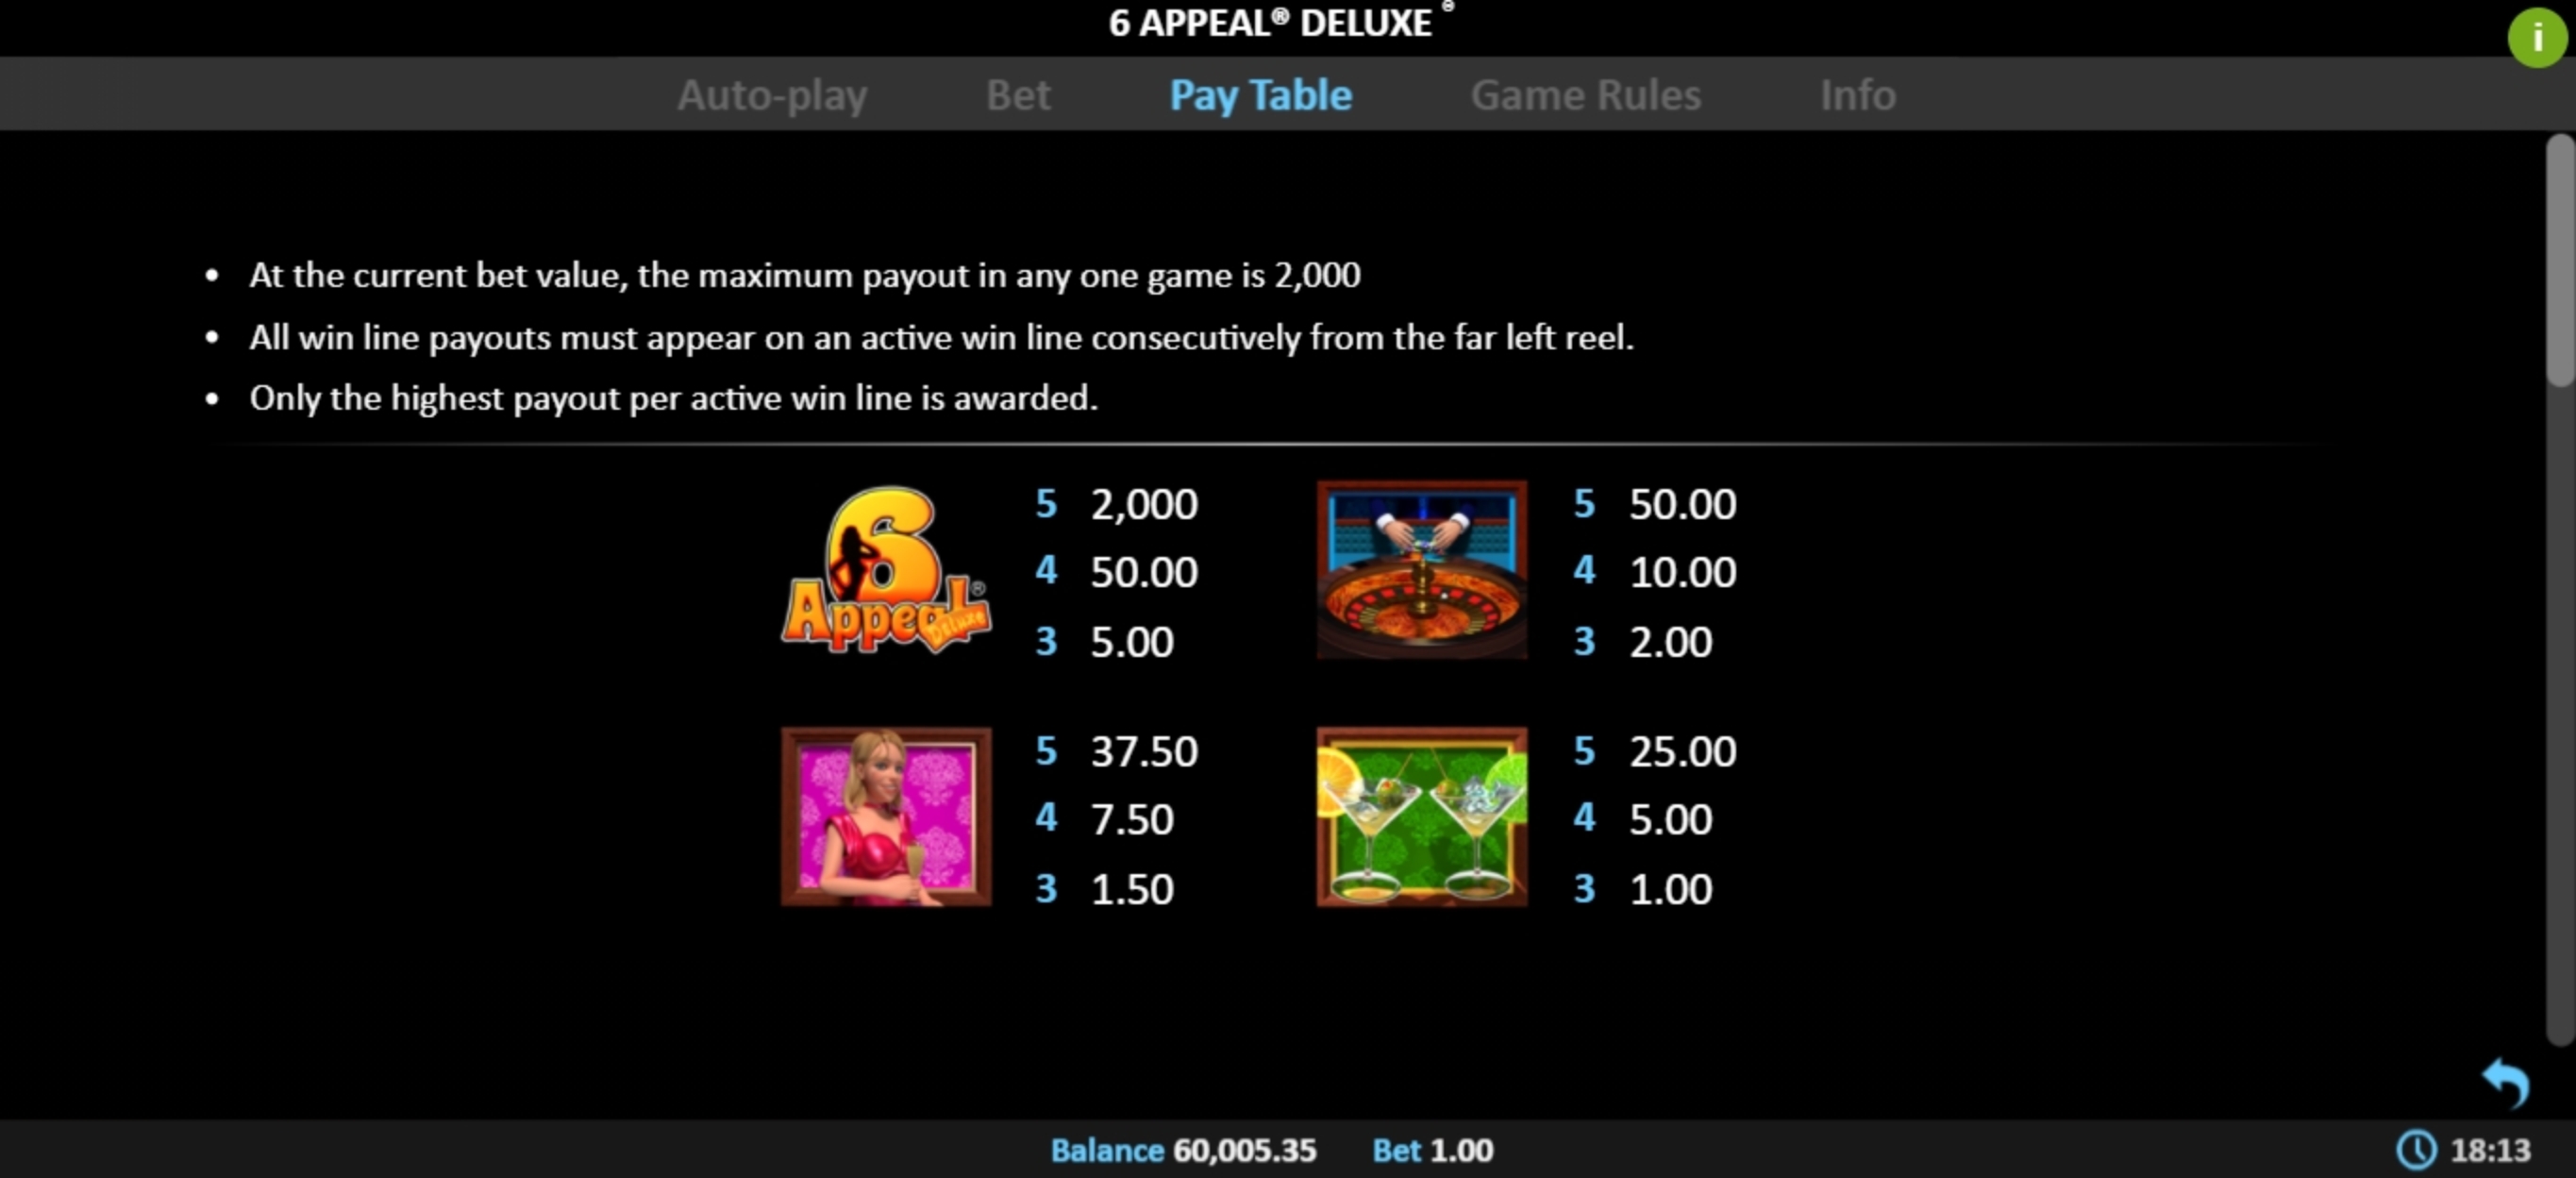 Info of 6 Appeal Deluxe Slot Game by Realistic Games